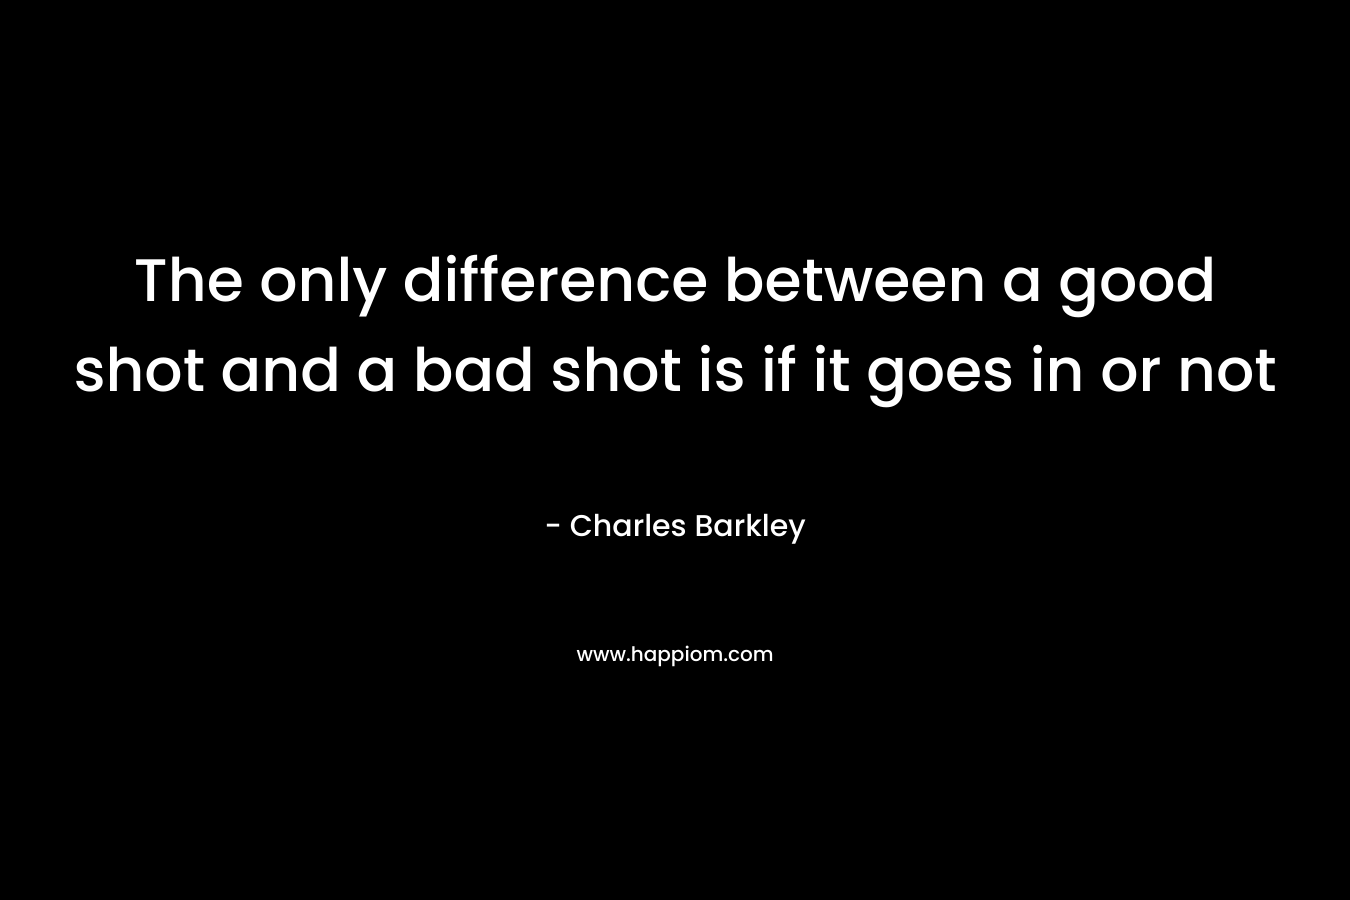 The only difference between a good shot and a bad shot is if it goes in or not